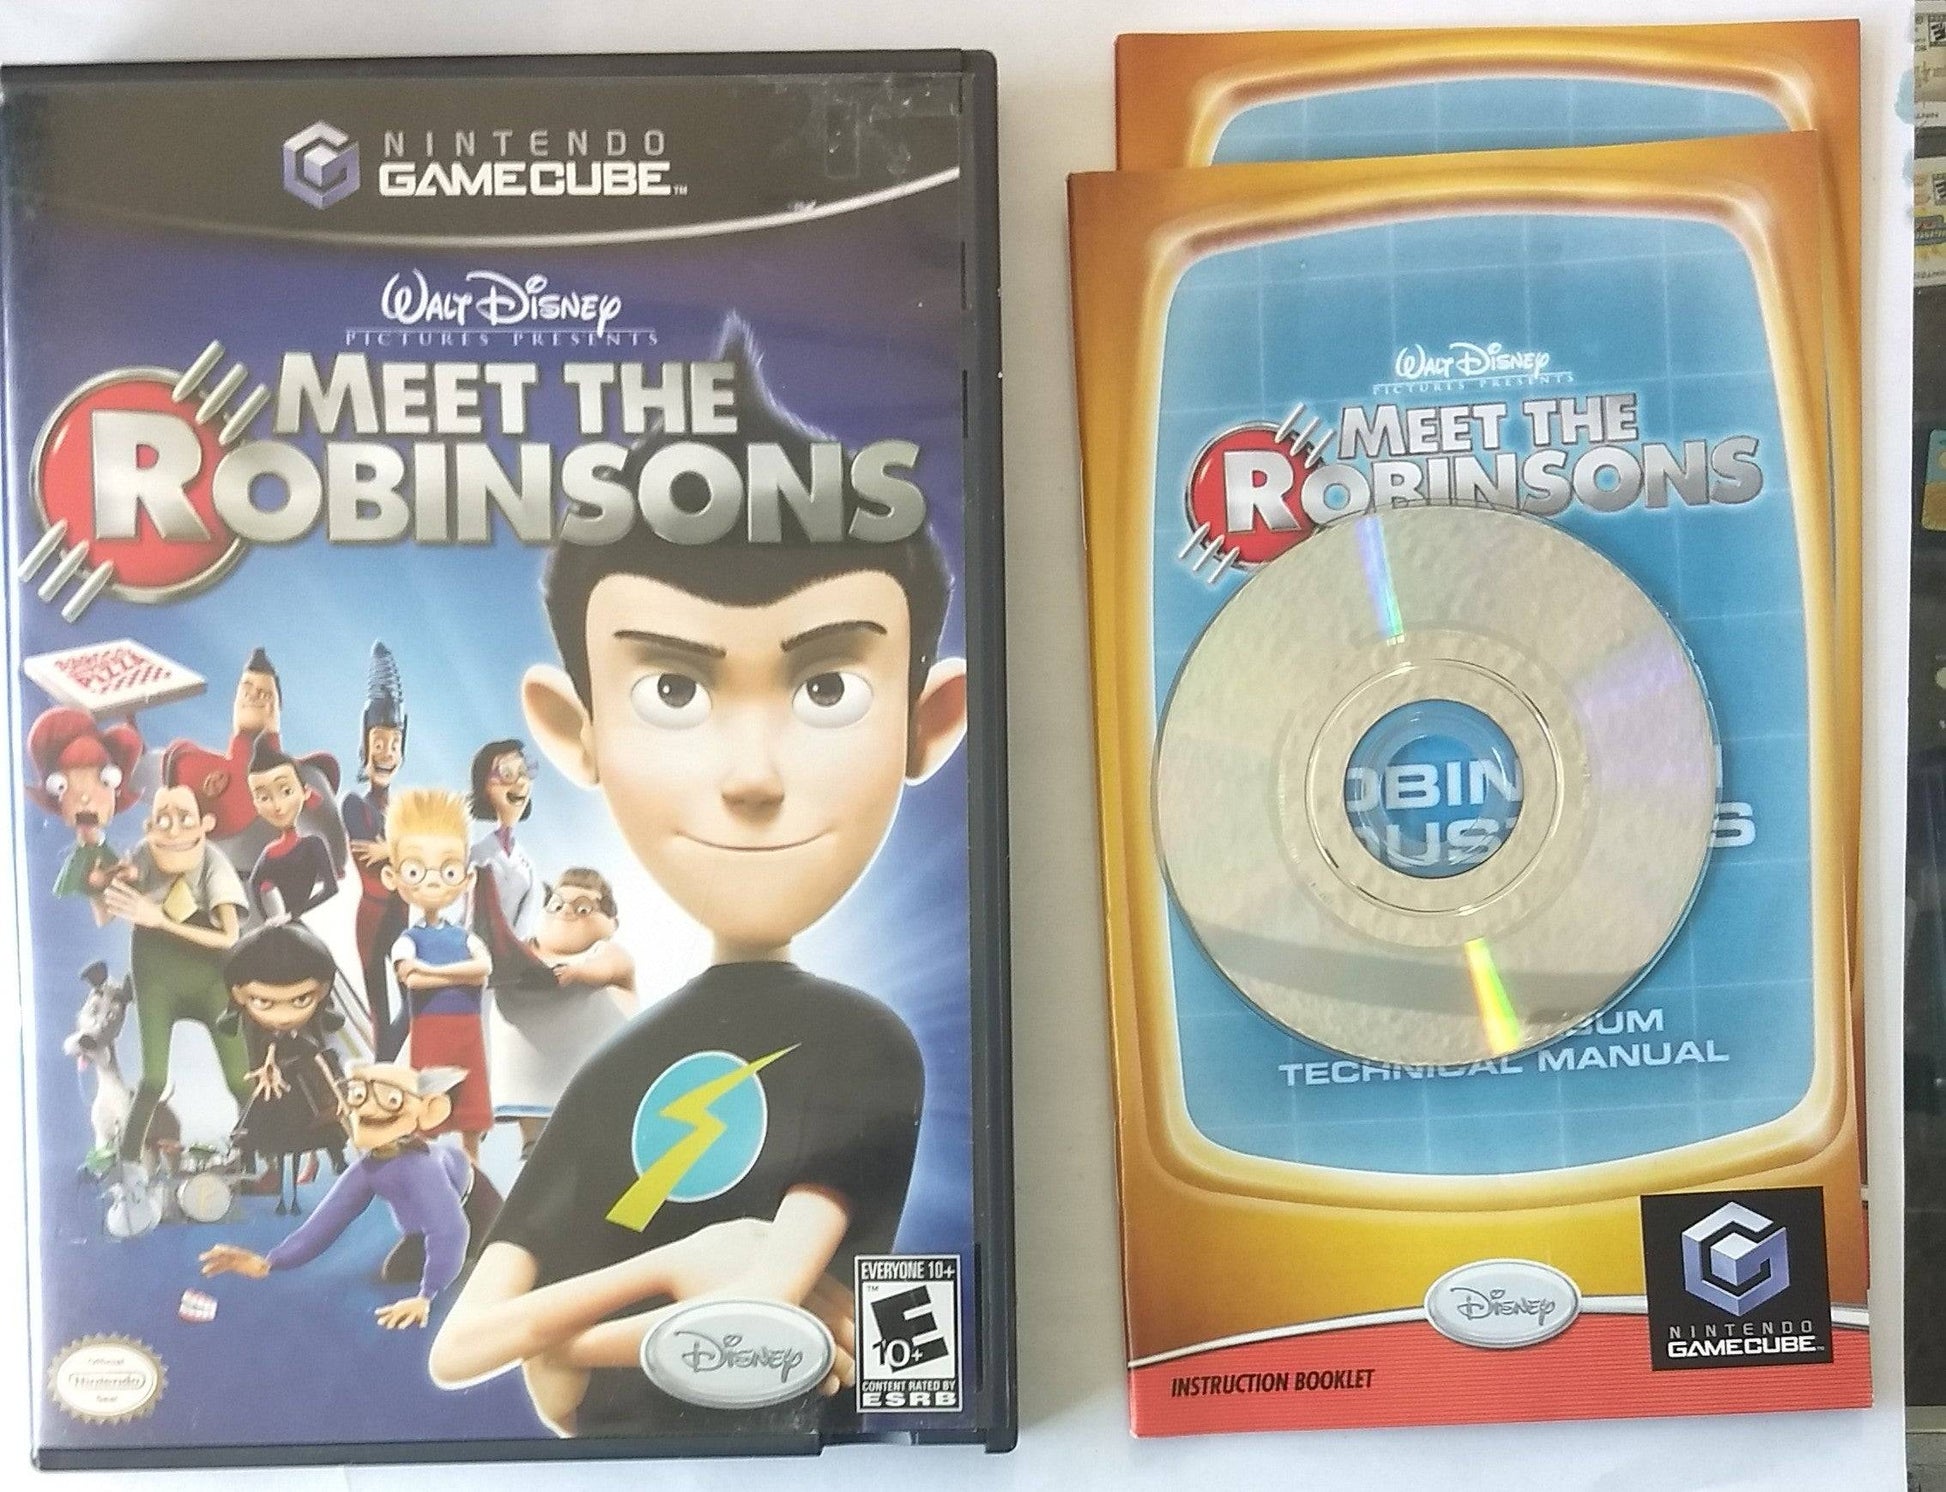 MEET THE ROBINSONS (NINTENDO GAMECUBE NGC) - jeux video game-x